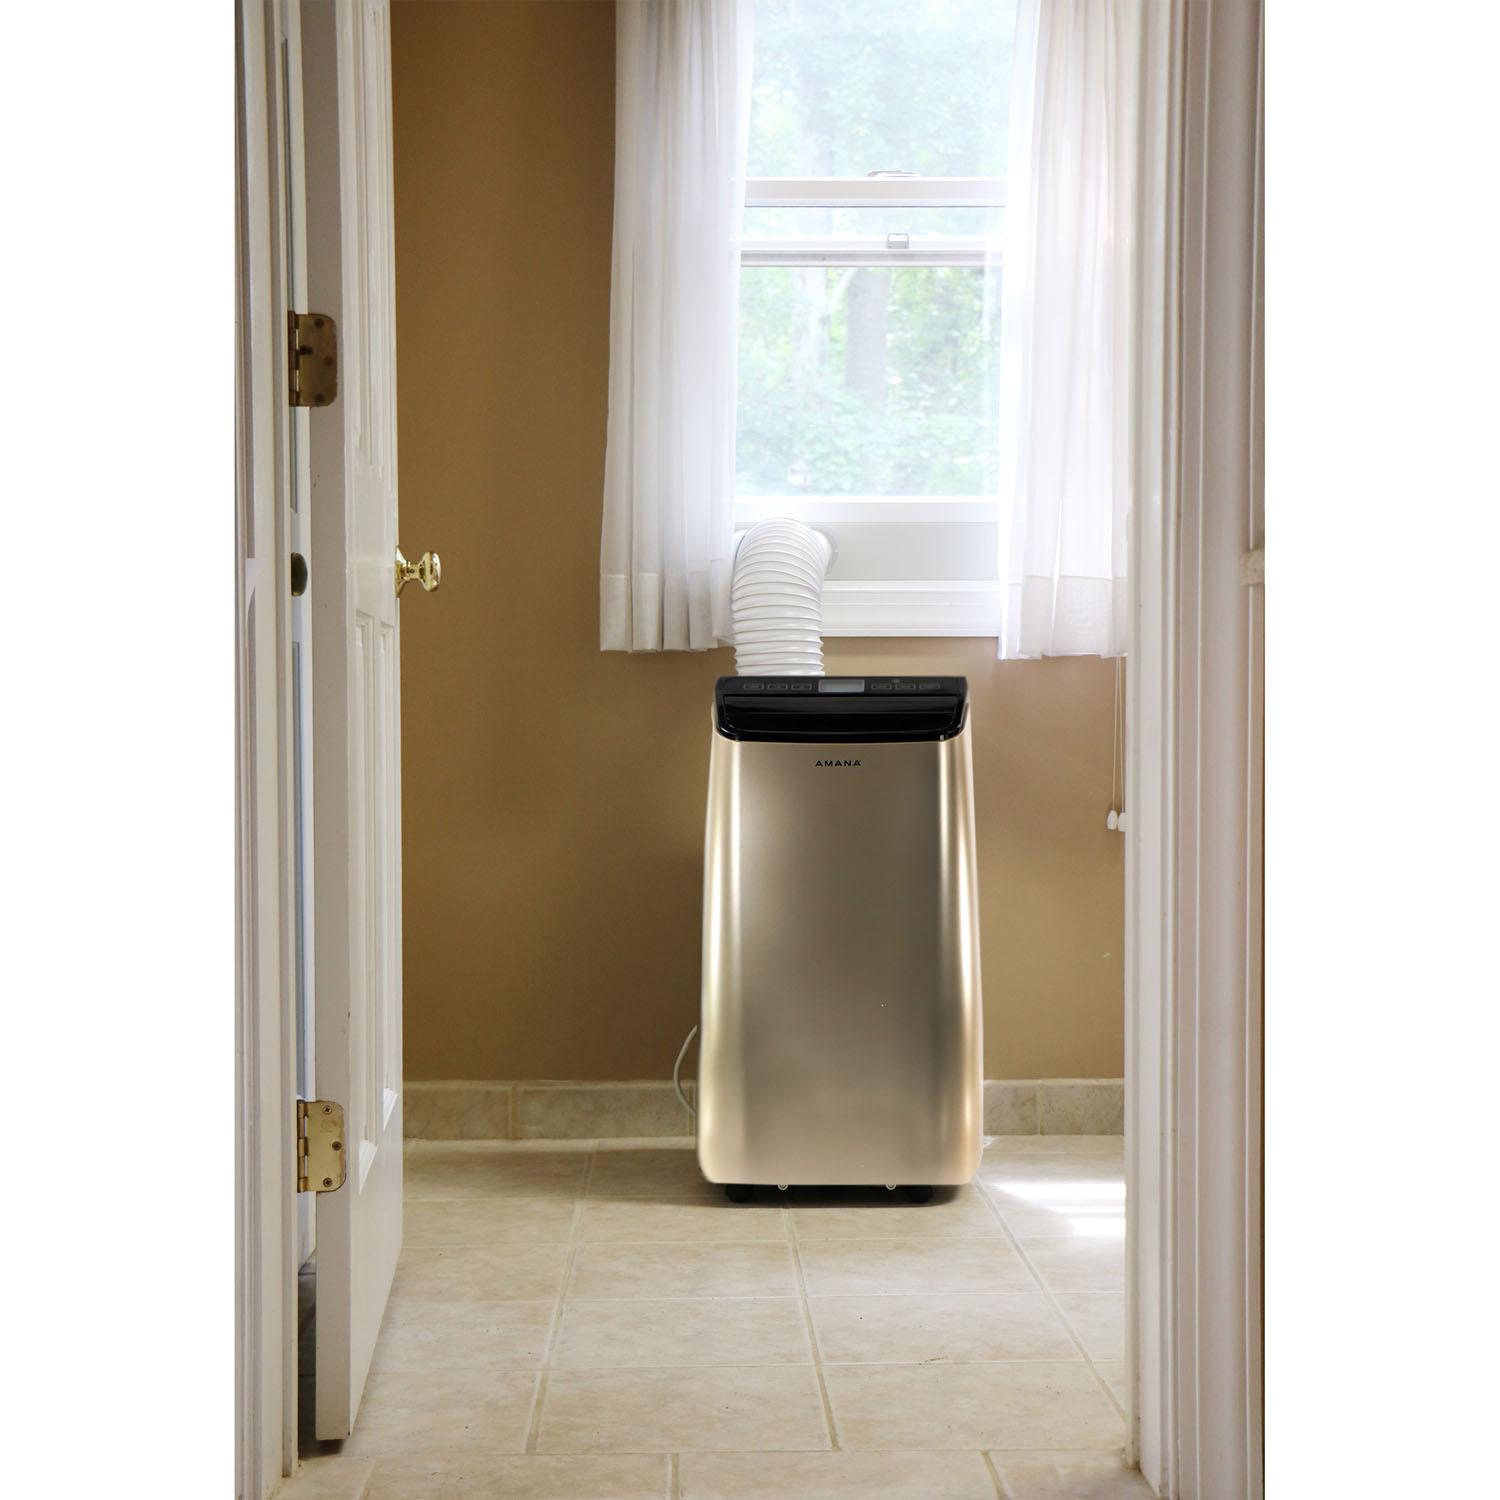 AMANA AMAP101AD2 Portable Air Conditioner with Remote Control in Gold/Black for Rooms up to 450-Sq. Ft.